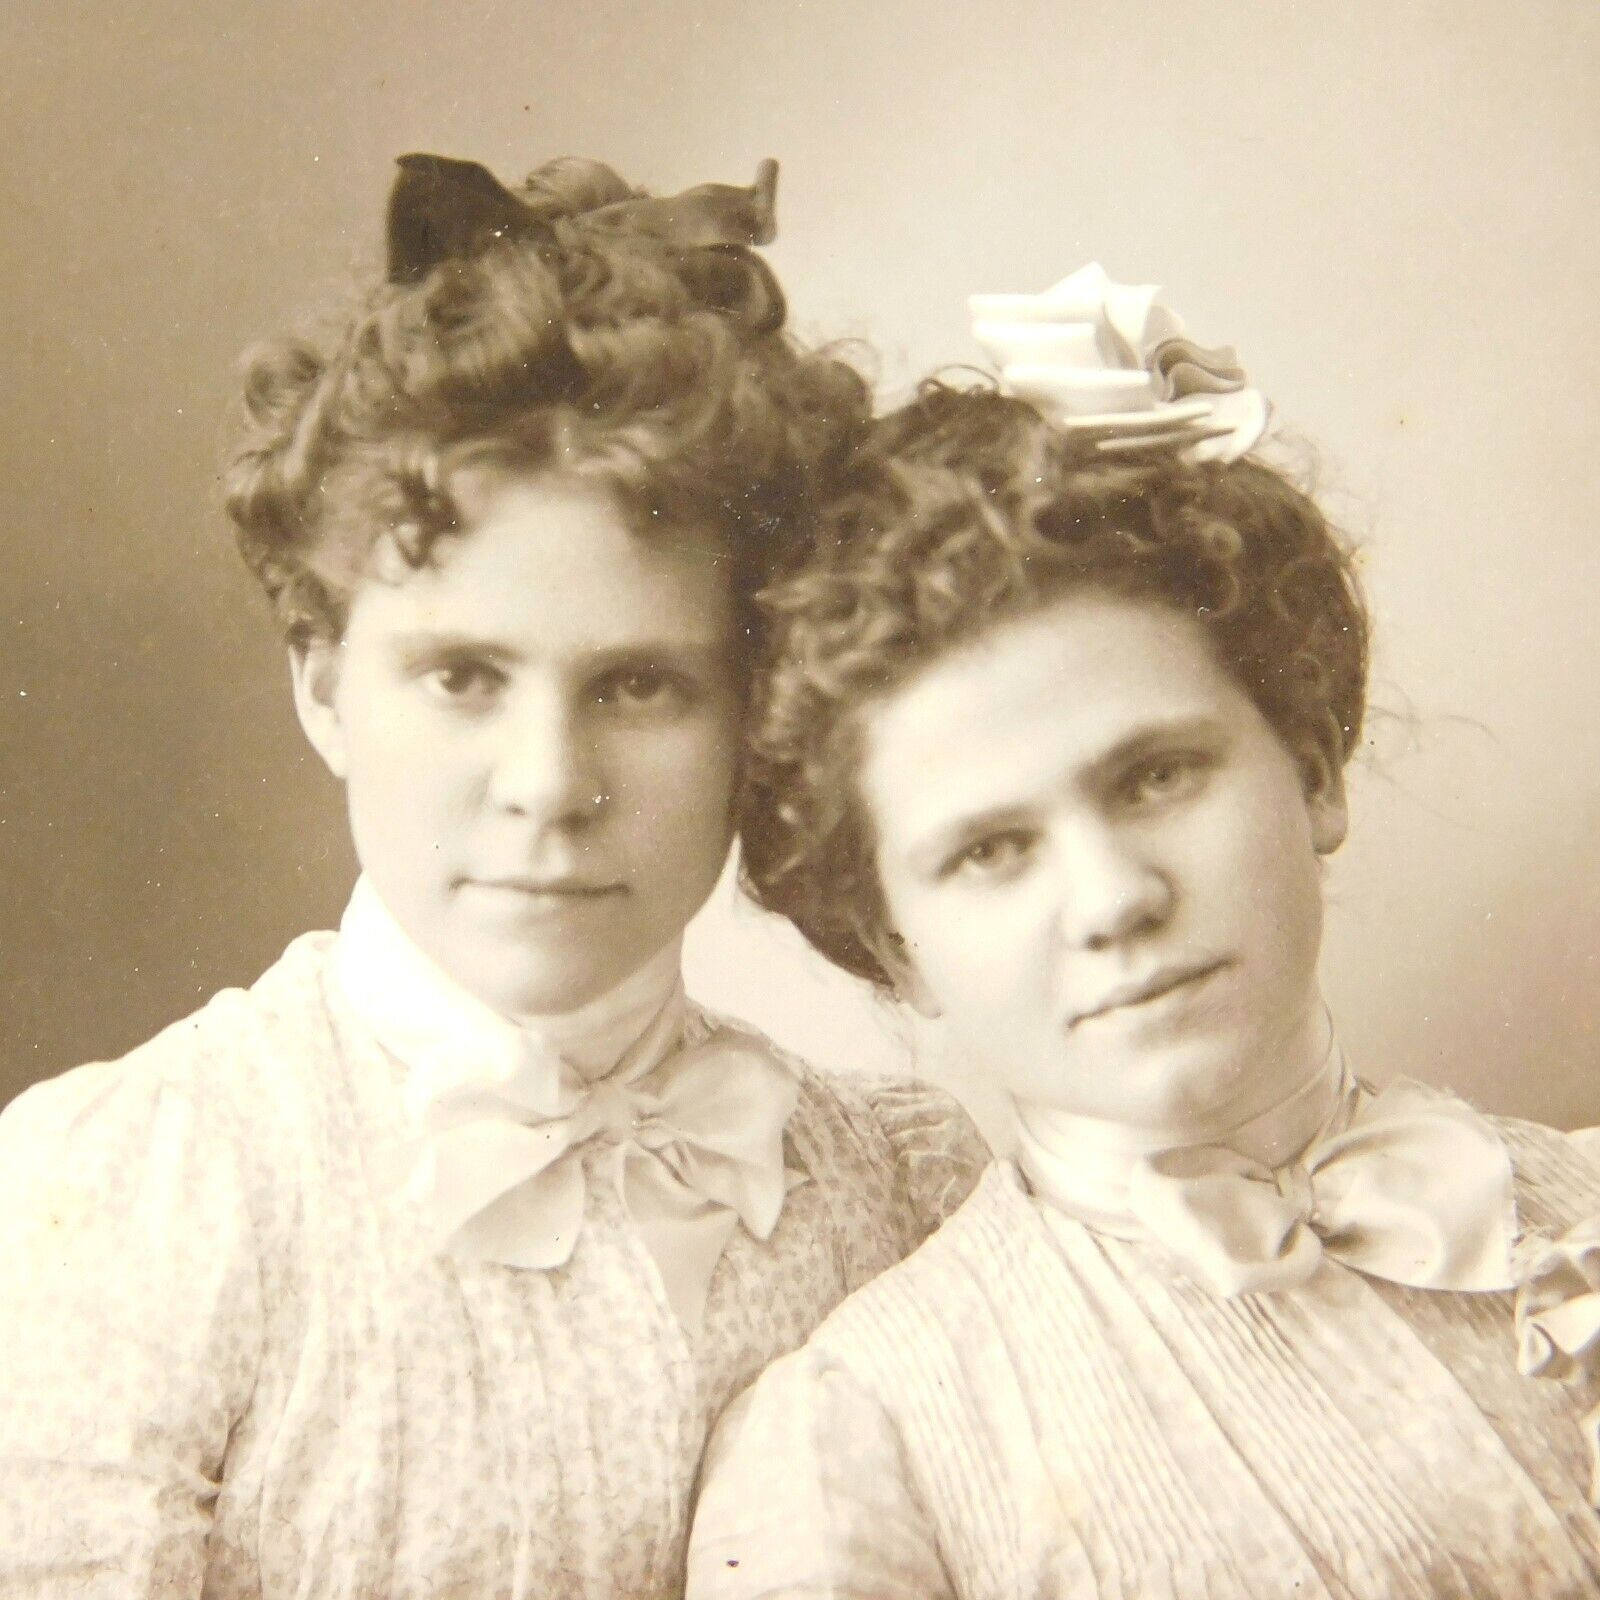 Antique Cabinet Card Two Women Sisters by Thompson, Ilion NY c.1800s